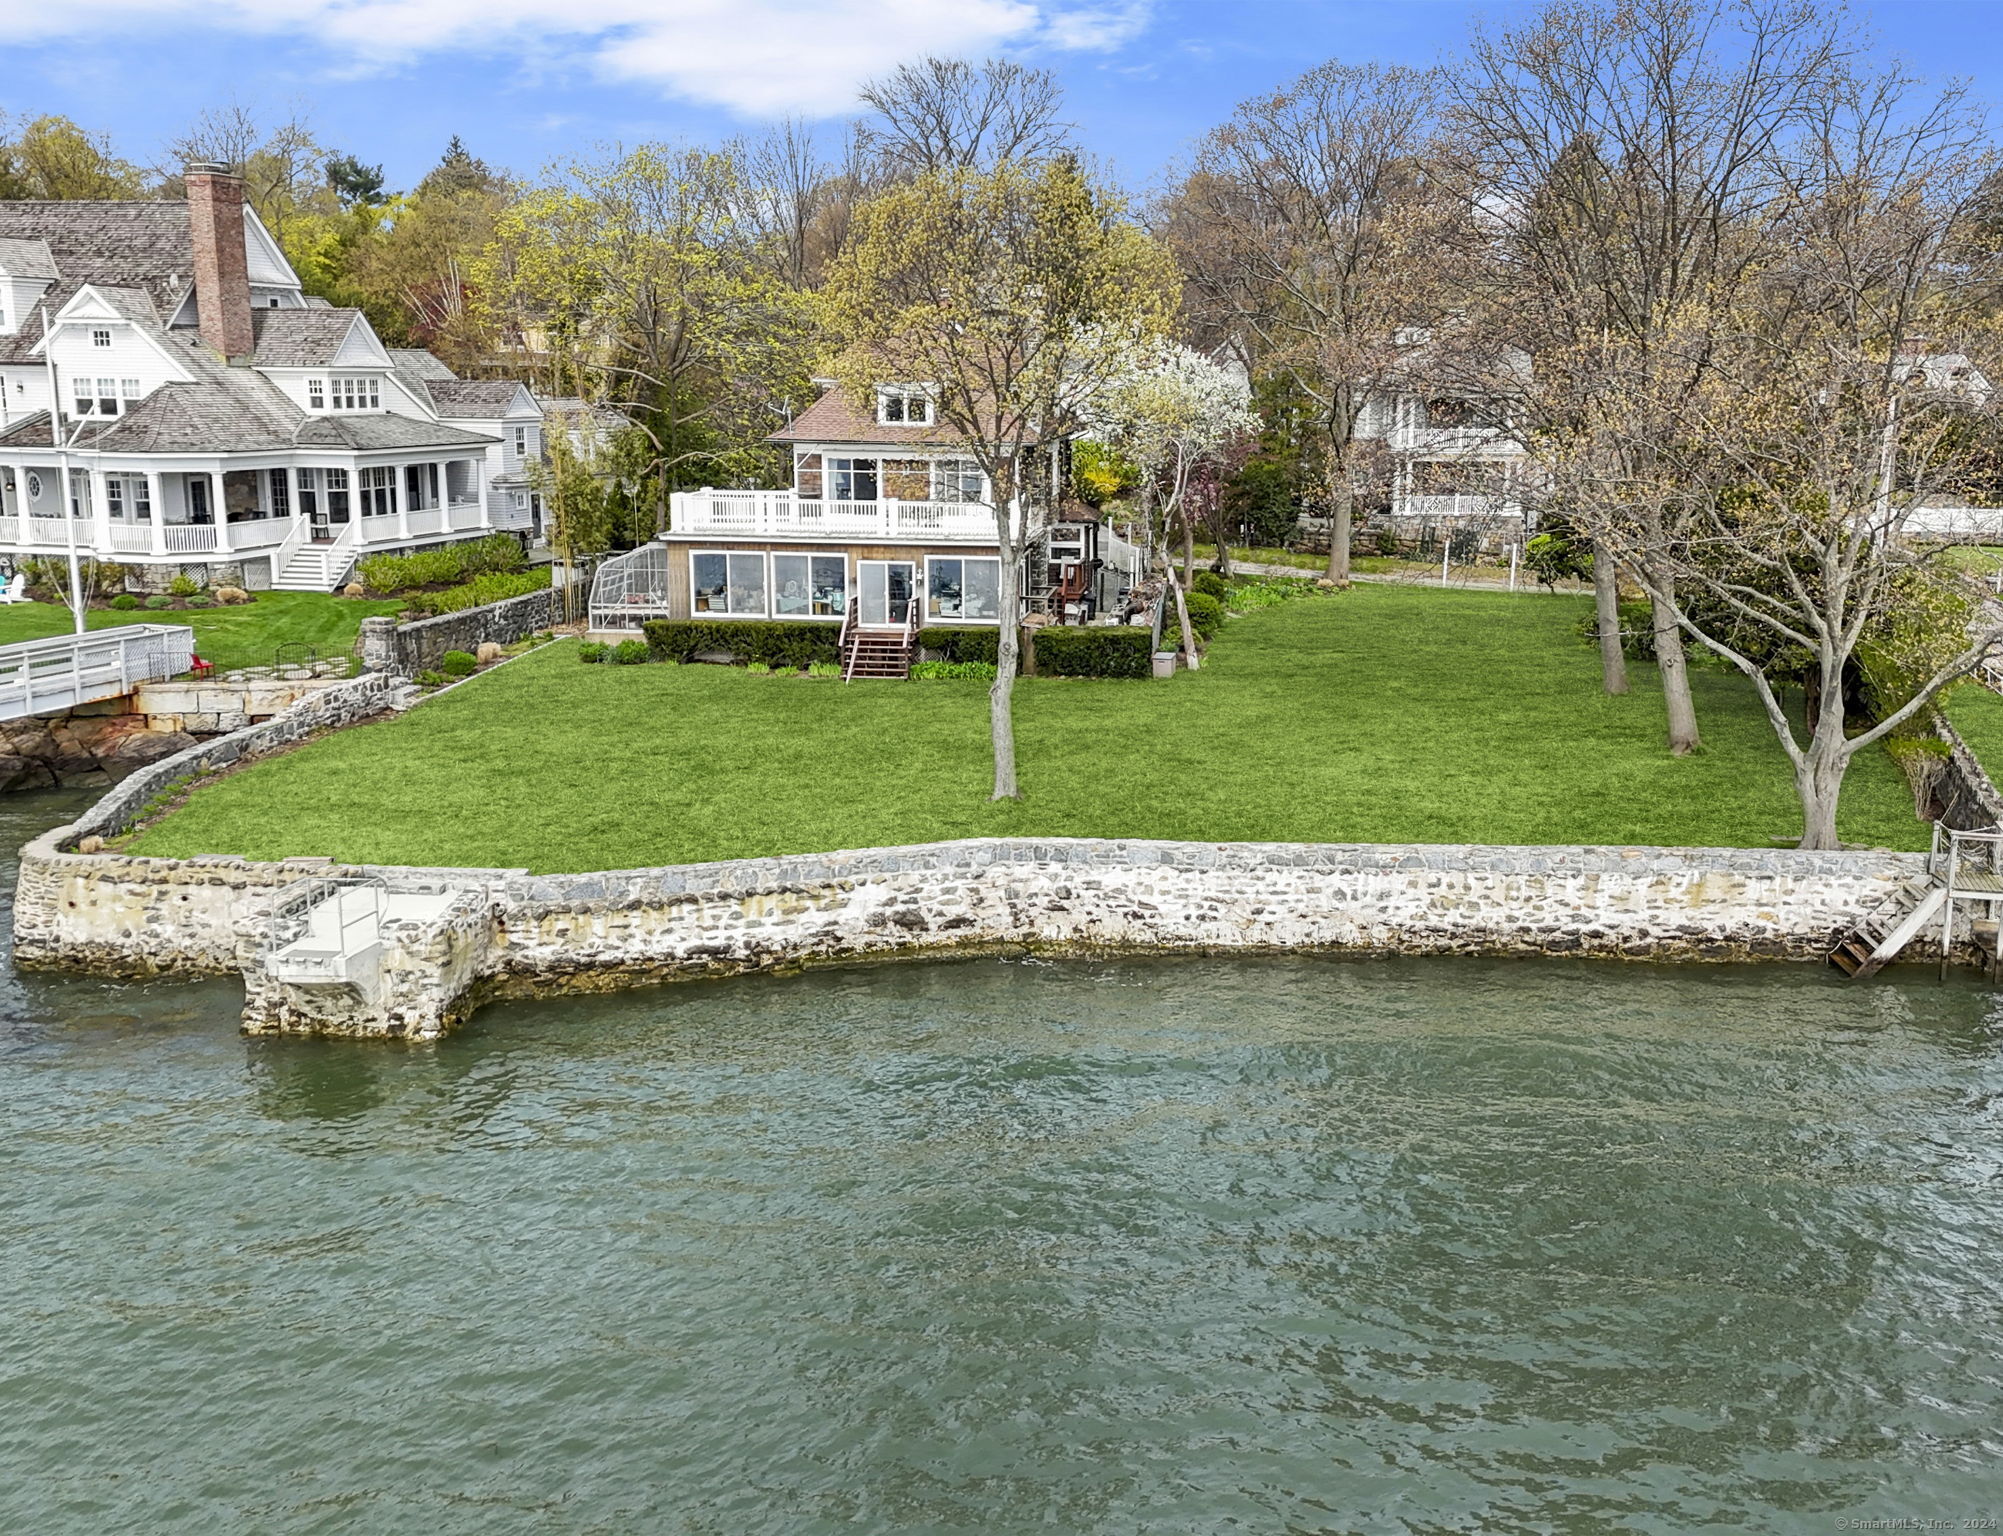 Experience tranquil waterfront living in Greenwich with sprawling vistas of Long Island Sound right outside your door. Offered for the first time on market in over 100 years, this expansive double lot spanning 0.7309 acres presents an ideal canvas for renovation or new construction, offering up to 10,028 sq/ft of FAR. Enjoy breathtaking views from your private dock or the current six-bedroom house. Conveniently located near Byram Park, residents can access the public pool, beach, marina, and boat launch. With close proximity to downtown Greenwich and Manhattan, this property seamlessly combines serenity with accessibility. Please note, the total FAR encompasses this listing combined with 0 Byram Dock Street.